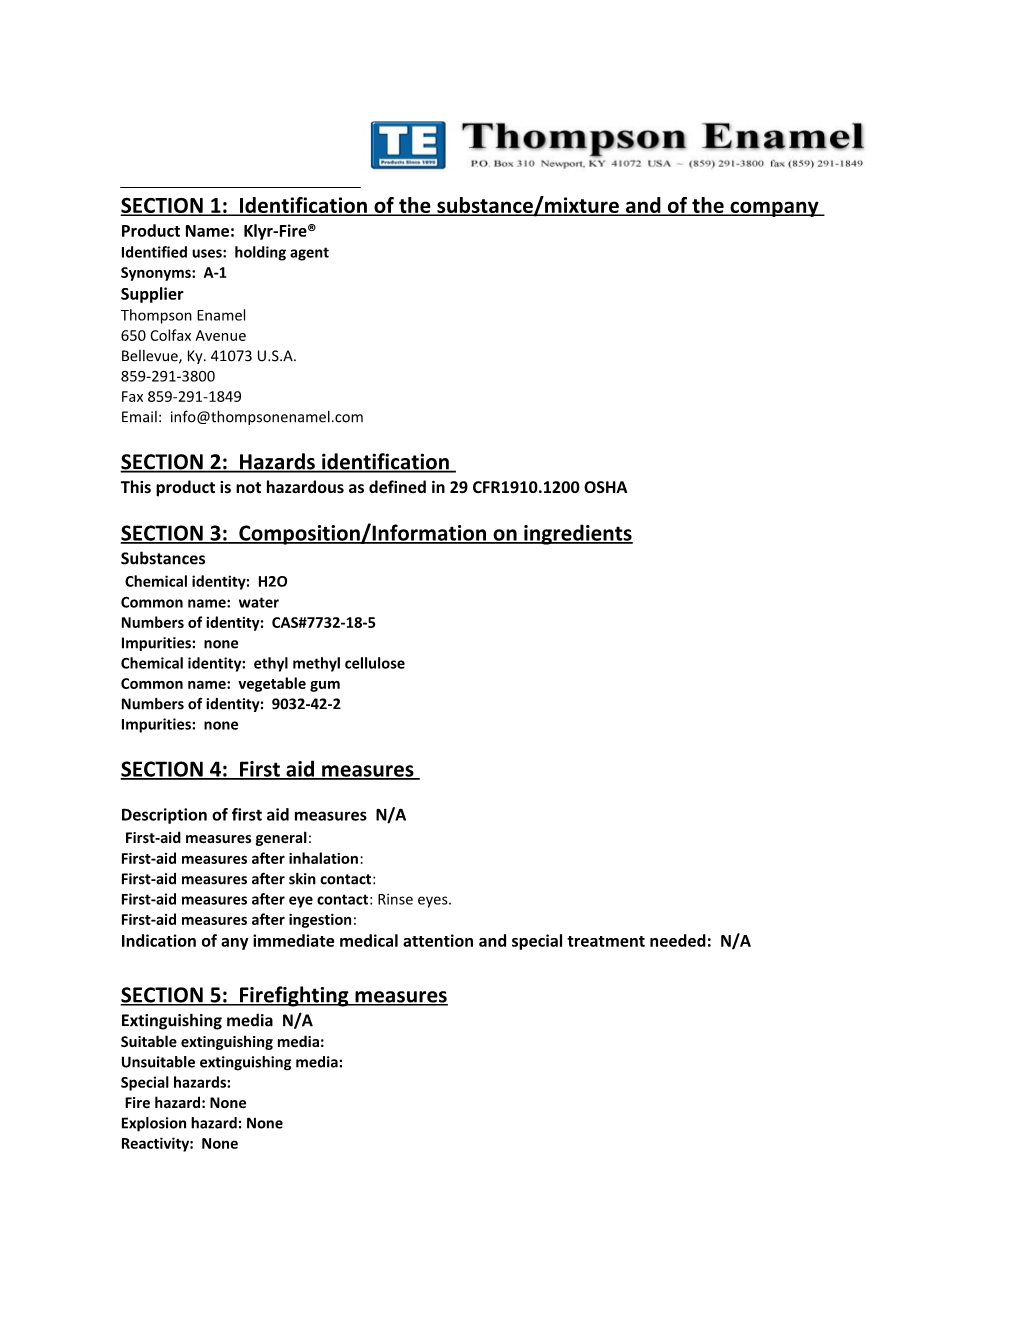 SECTION 1: Identification of the Substance/Mixture and of the Company